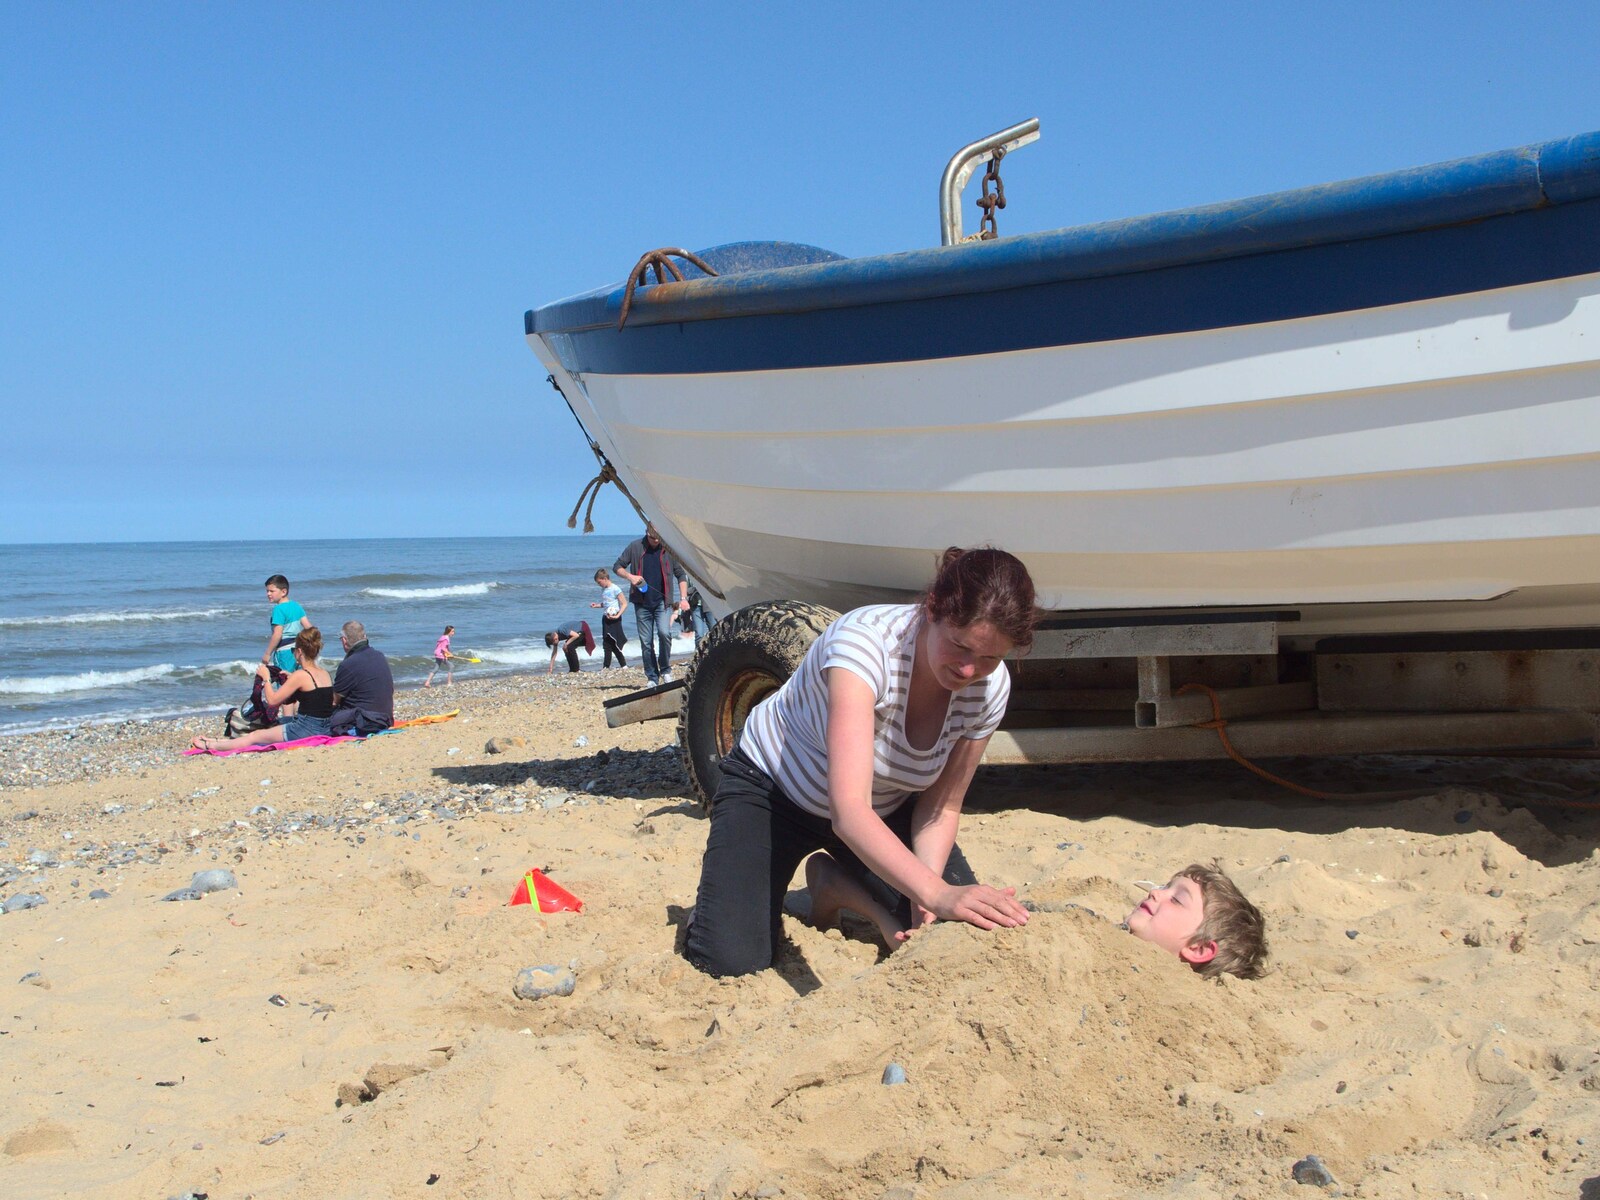 Isobel finishes Fred's sand sarcophagus from A Birthday Camping Trip, East Runton, North Norfolk - 26th May 2015